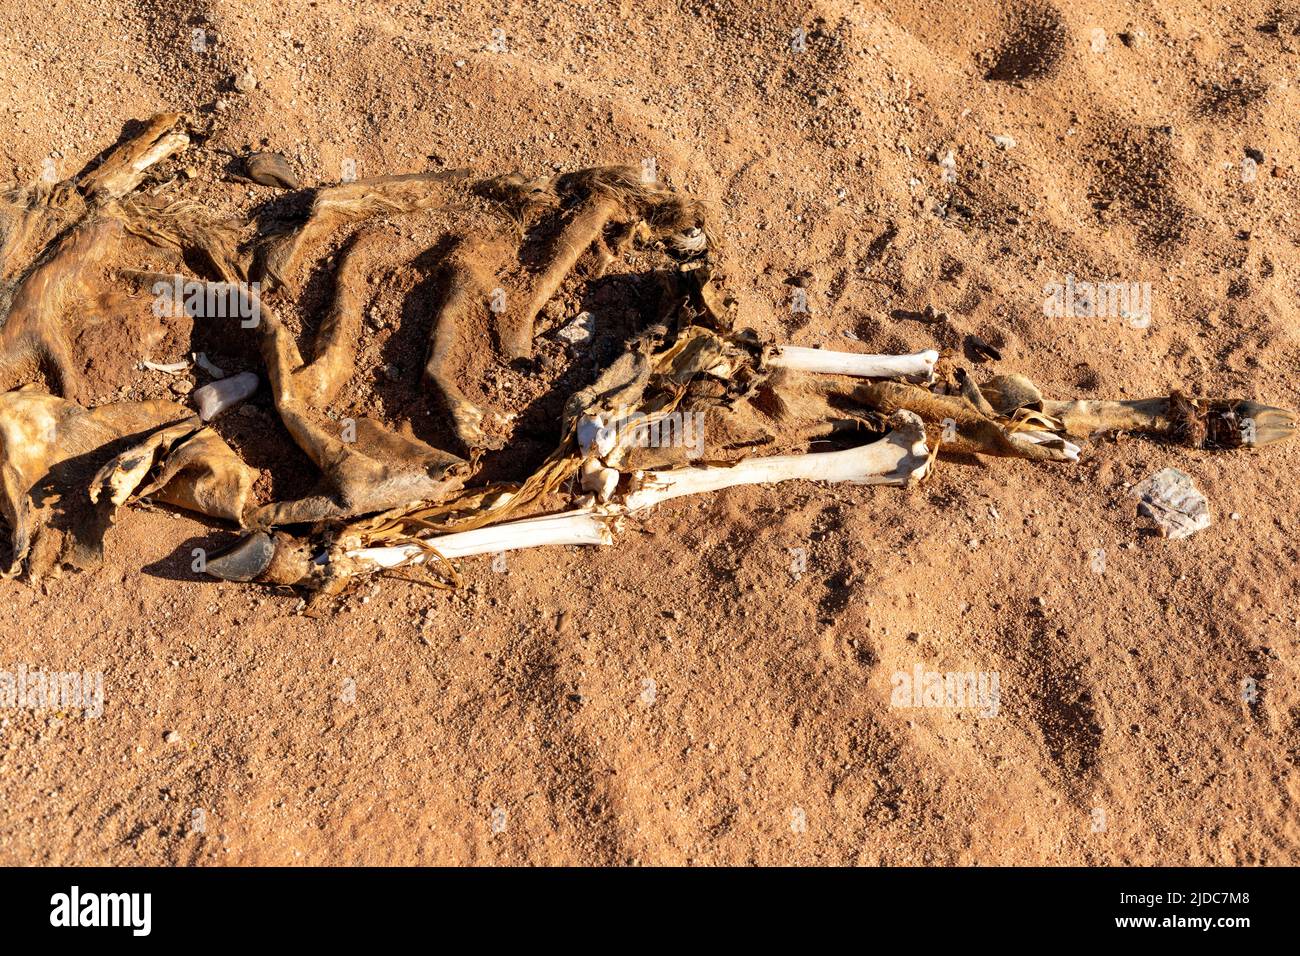 Animal bones and skin in the sand in a dry desert. Stock Photo